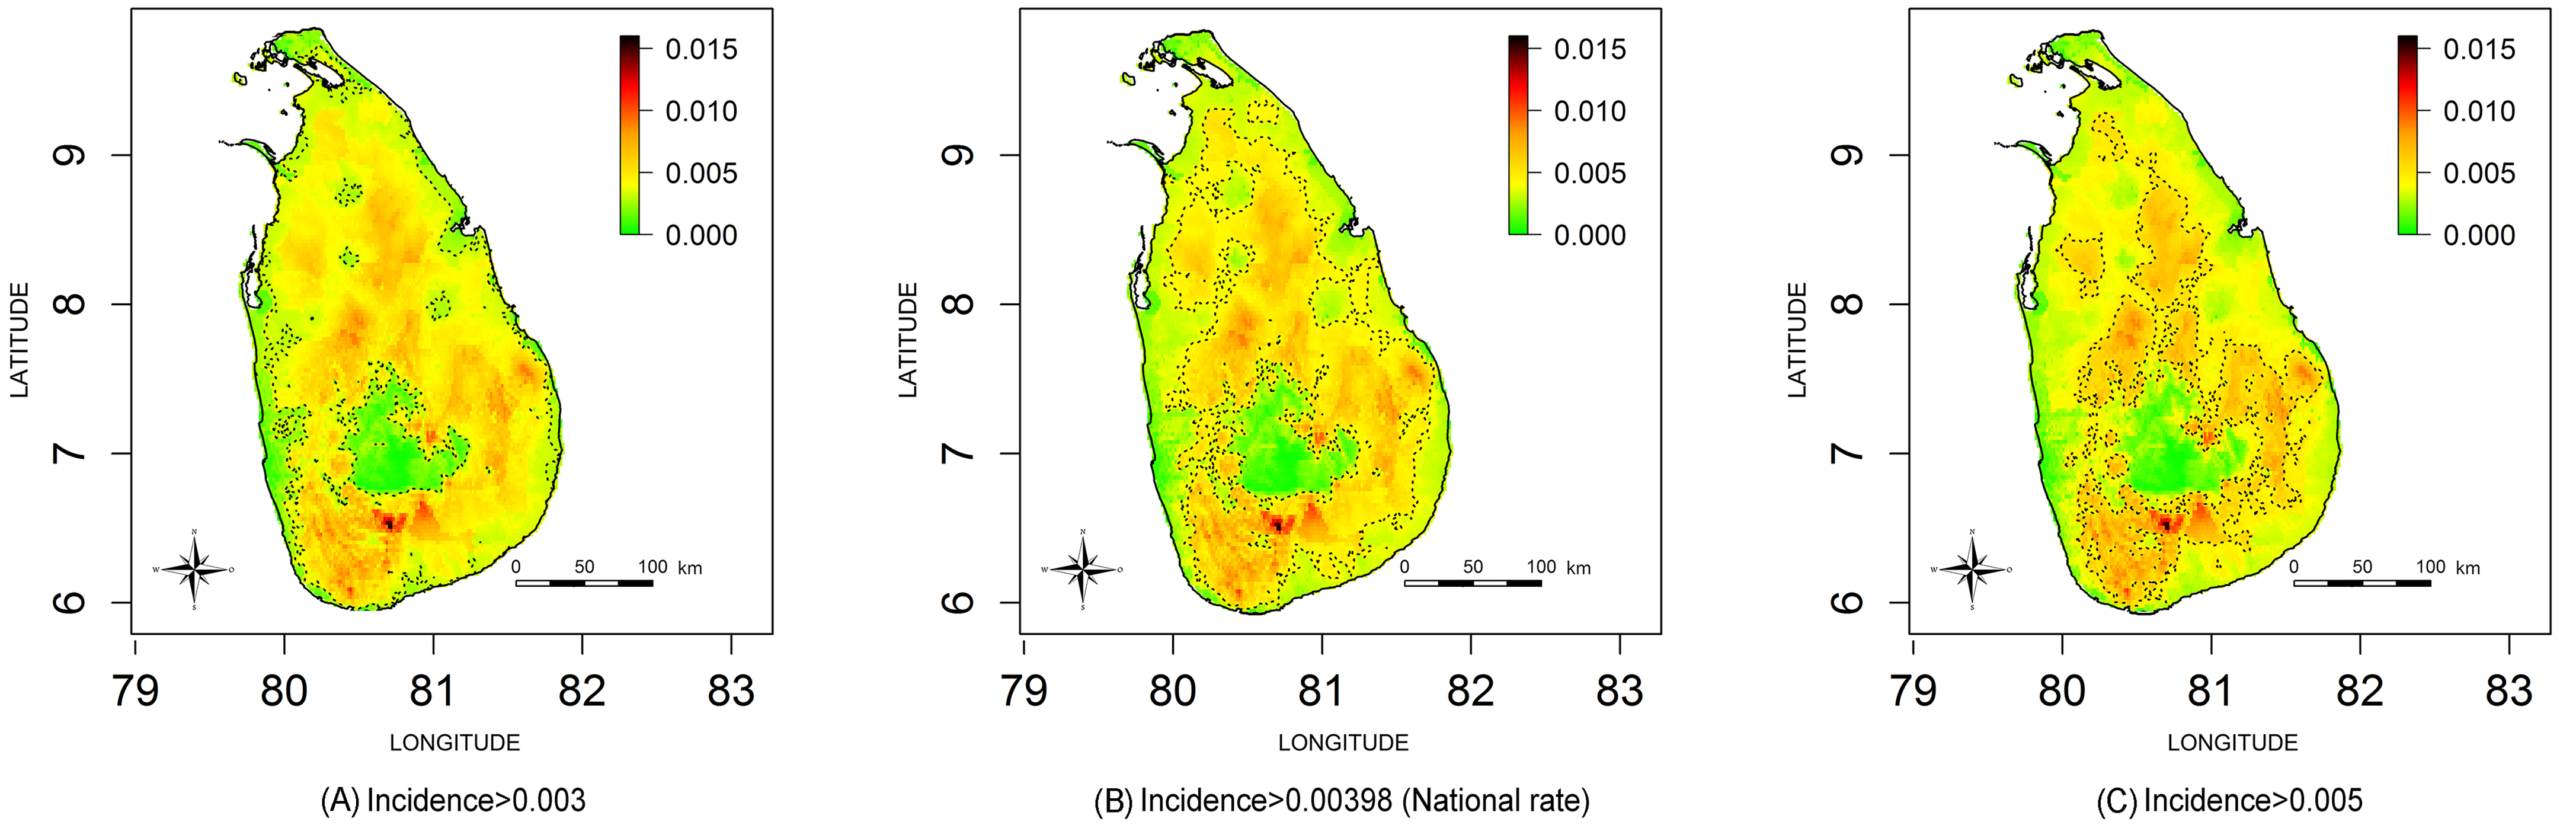 Geographical variation in snake bite incidence per person per year in Sri Lanka September 2011 to August 2012 